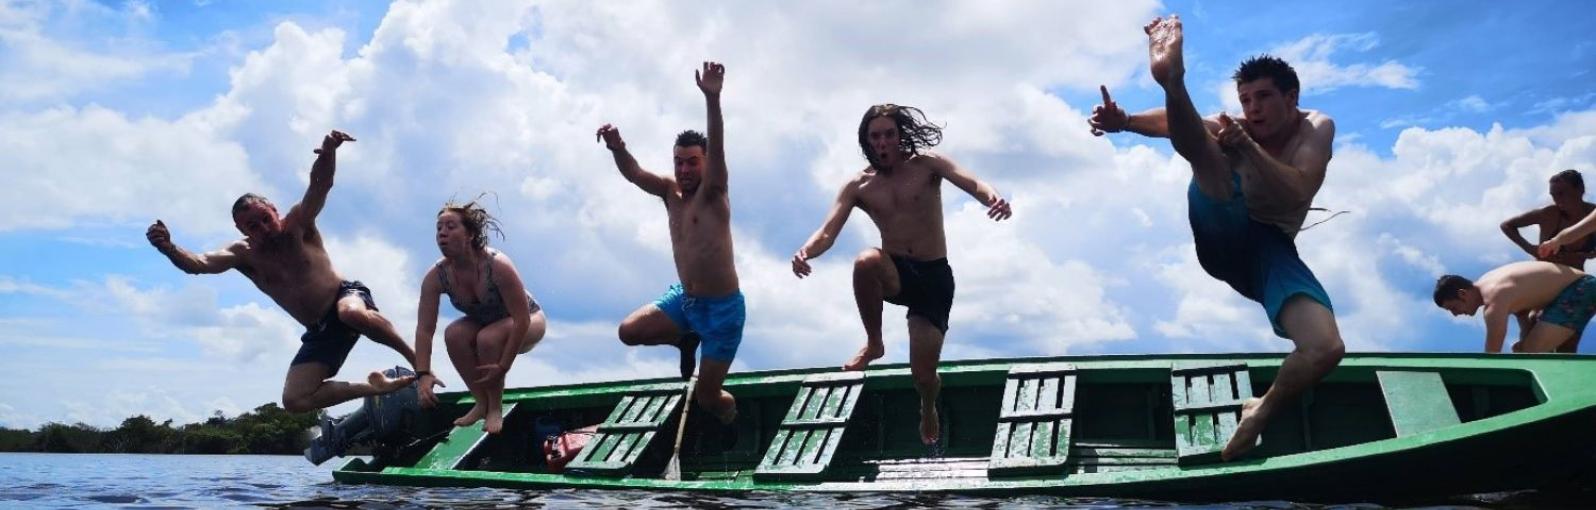 Students jumping off a boat during Brazil field trip 2020